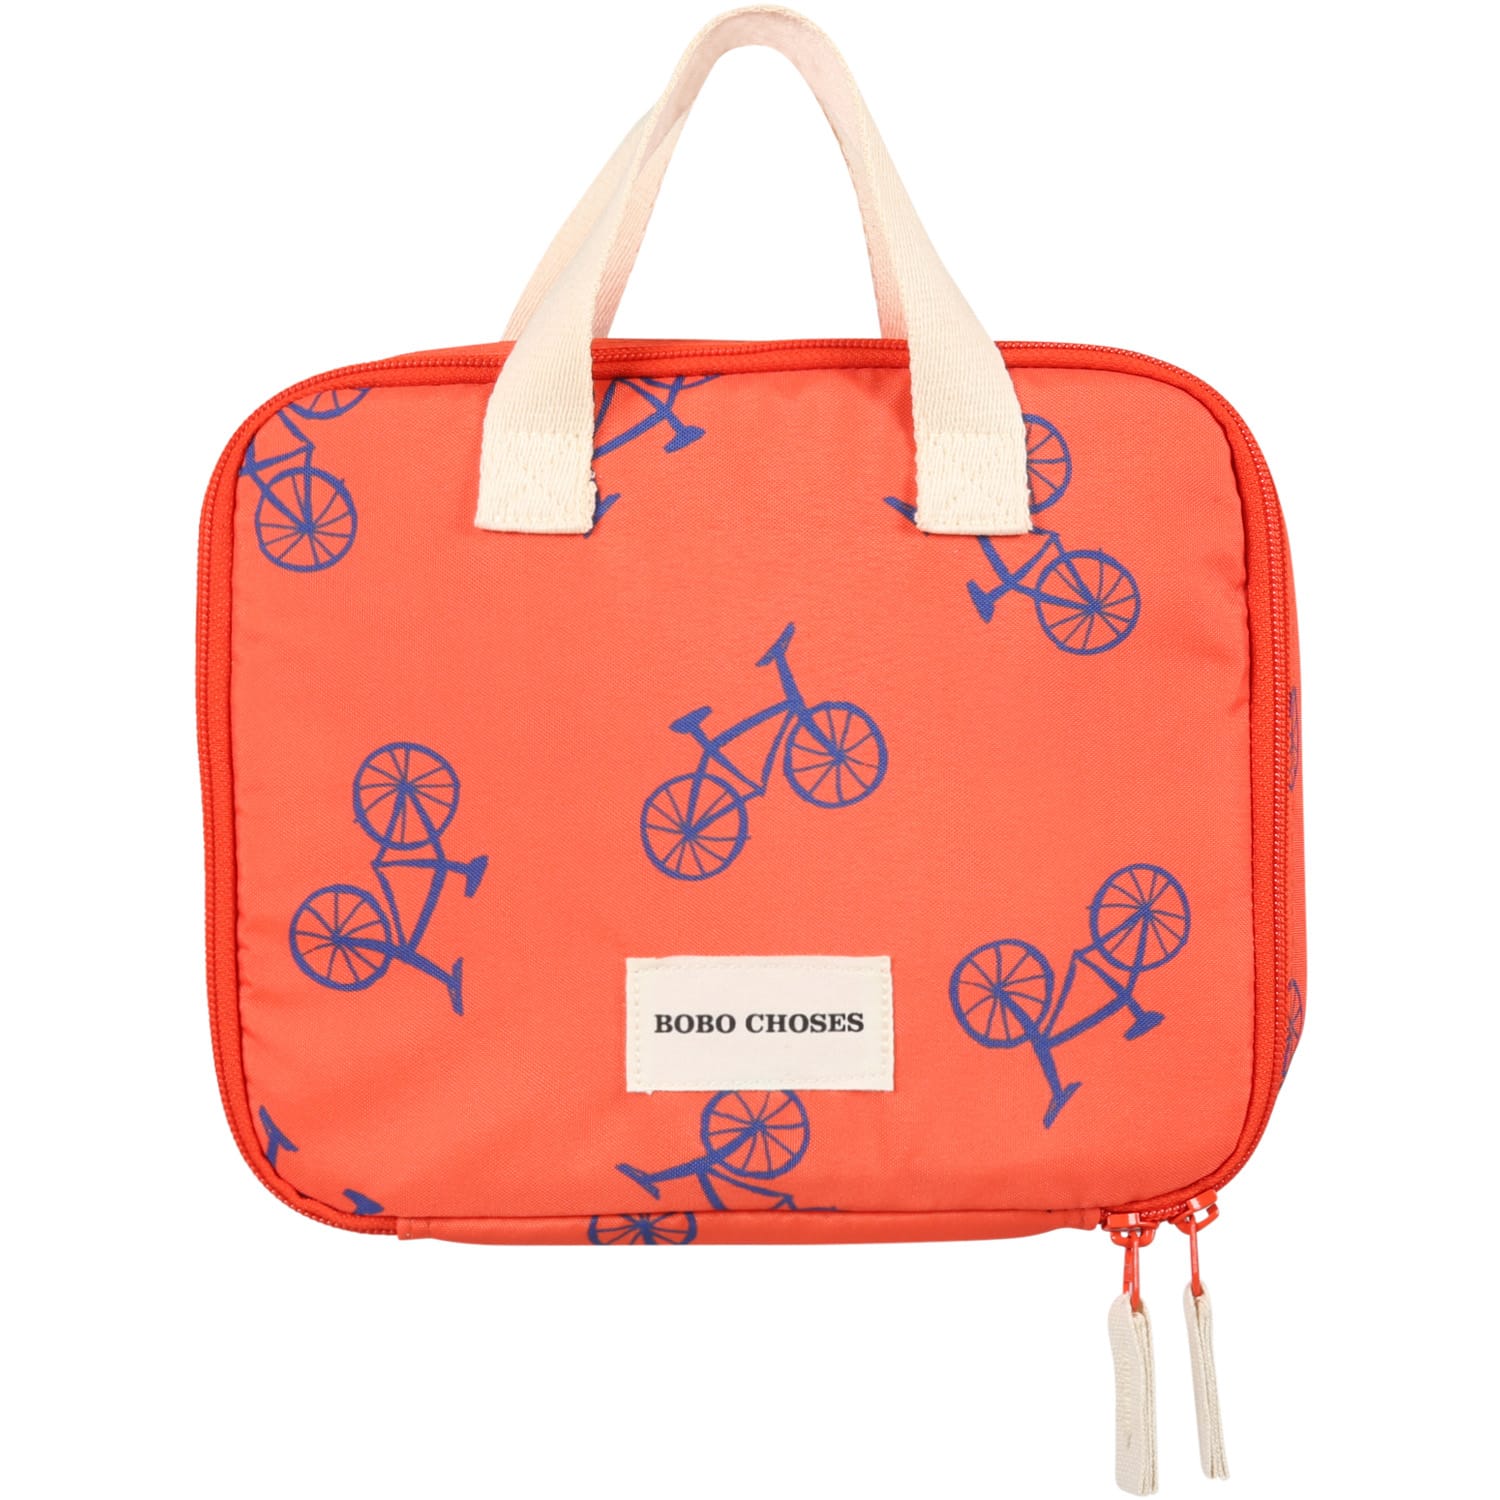 Bobo Choses Orange Lunch-box For Kids With Blue Bike And Patch Logo